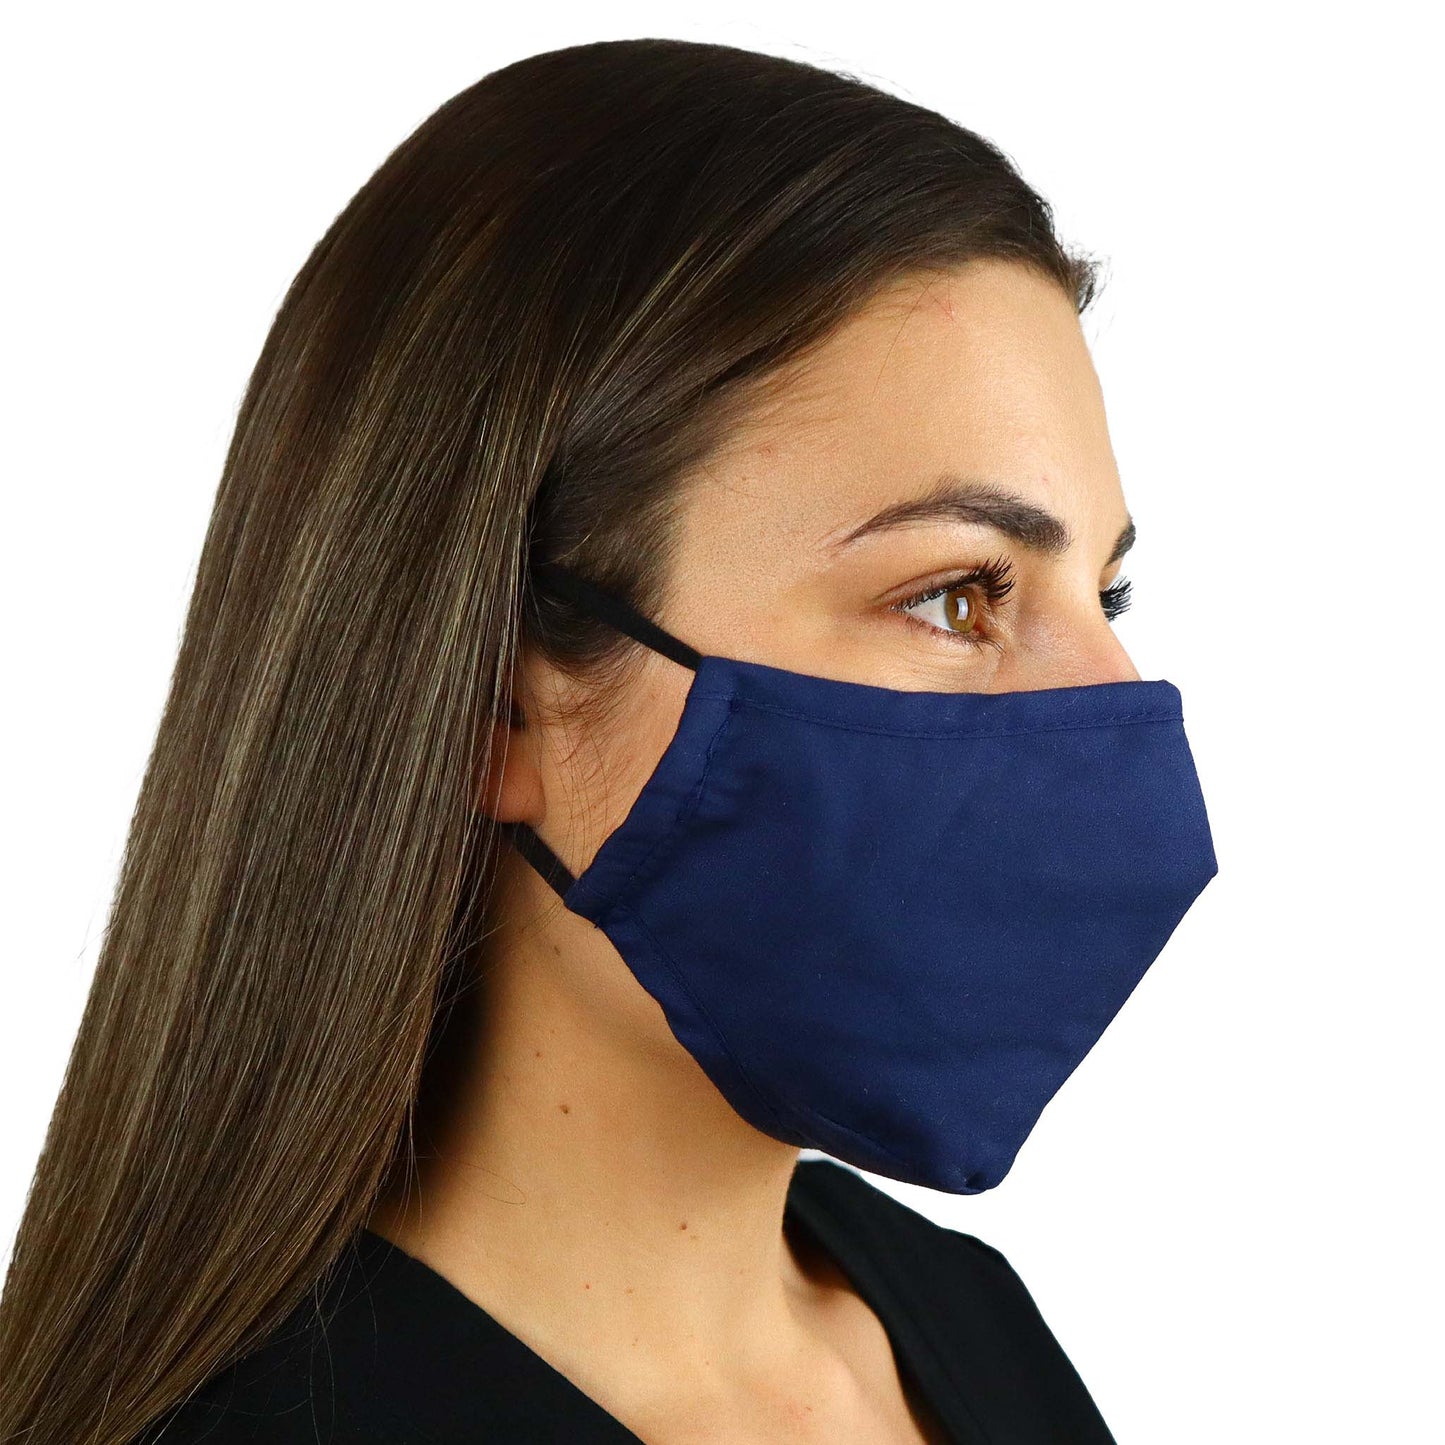 Fit Right Medical Scrubs Navy Face Mask Covering